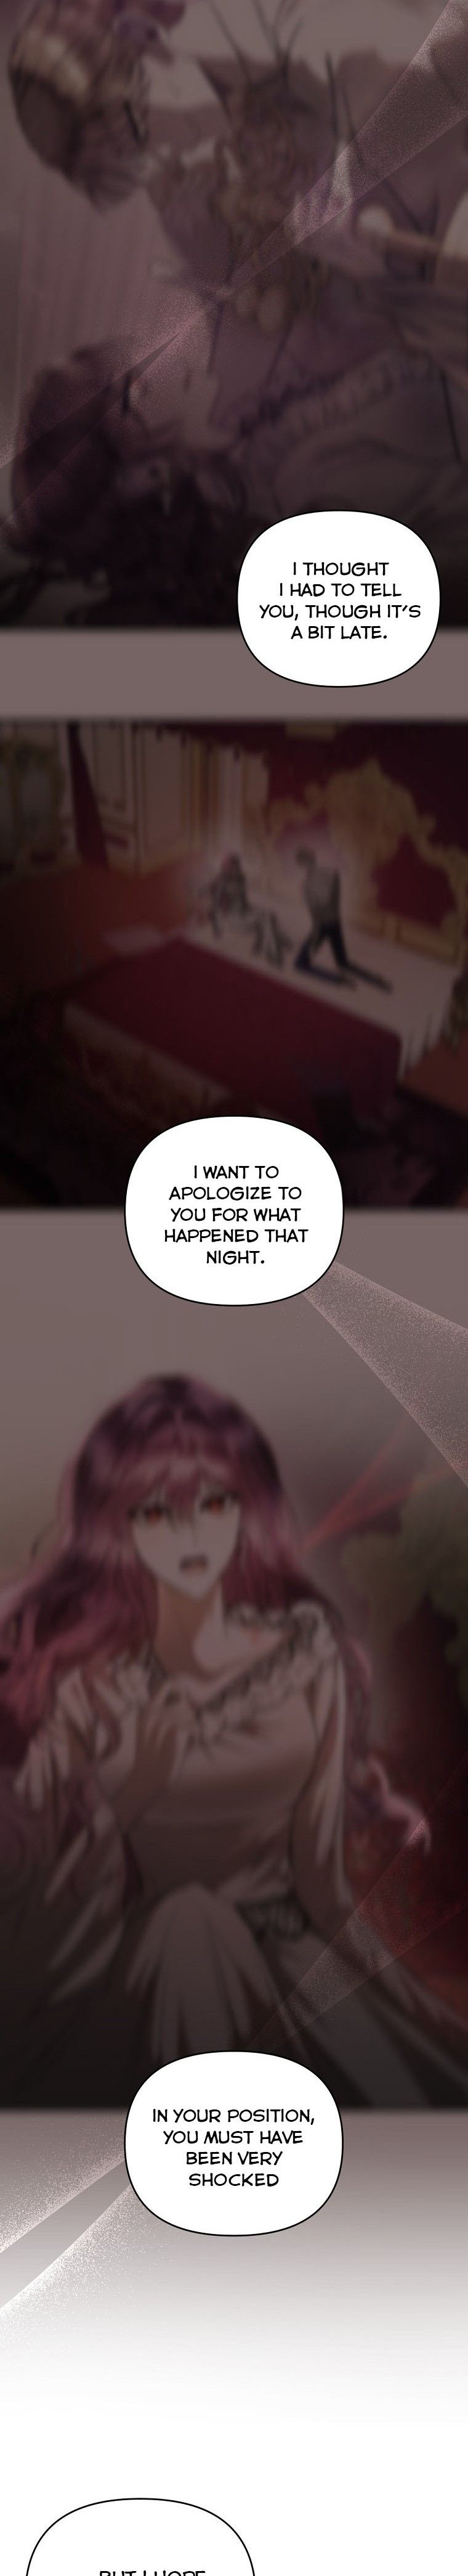 How to survive sleeping with the emperor Chapter 11 page 7